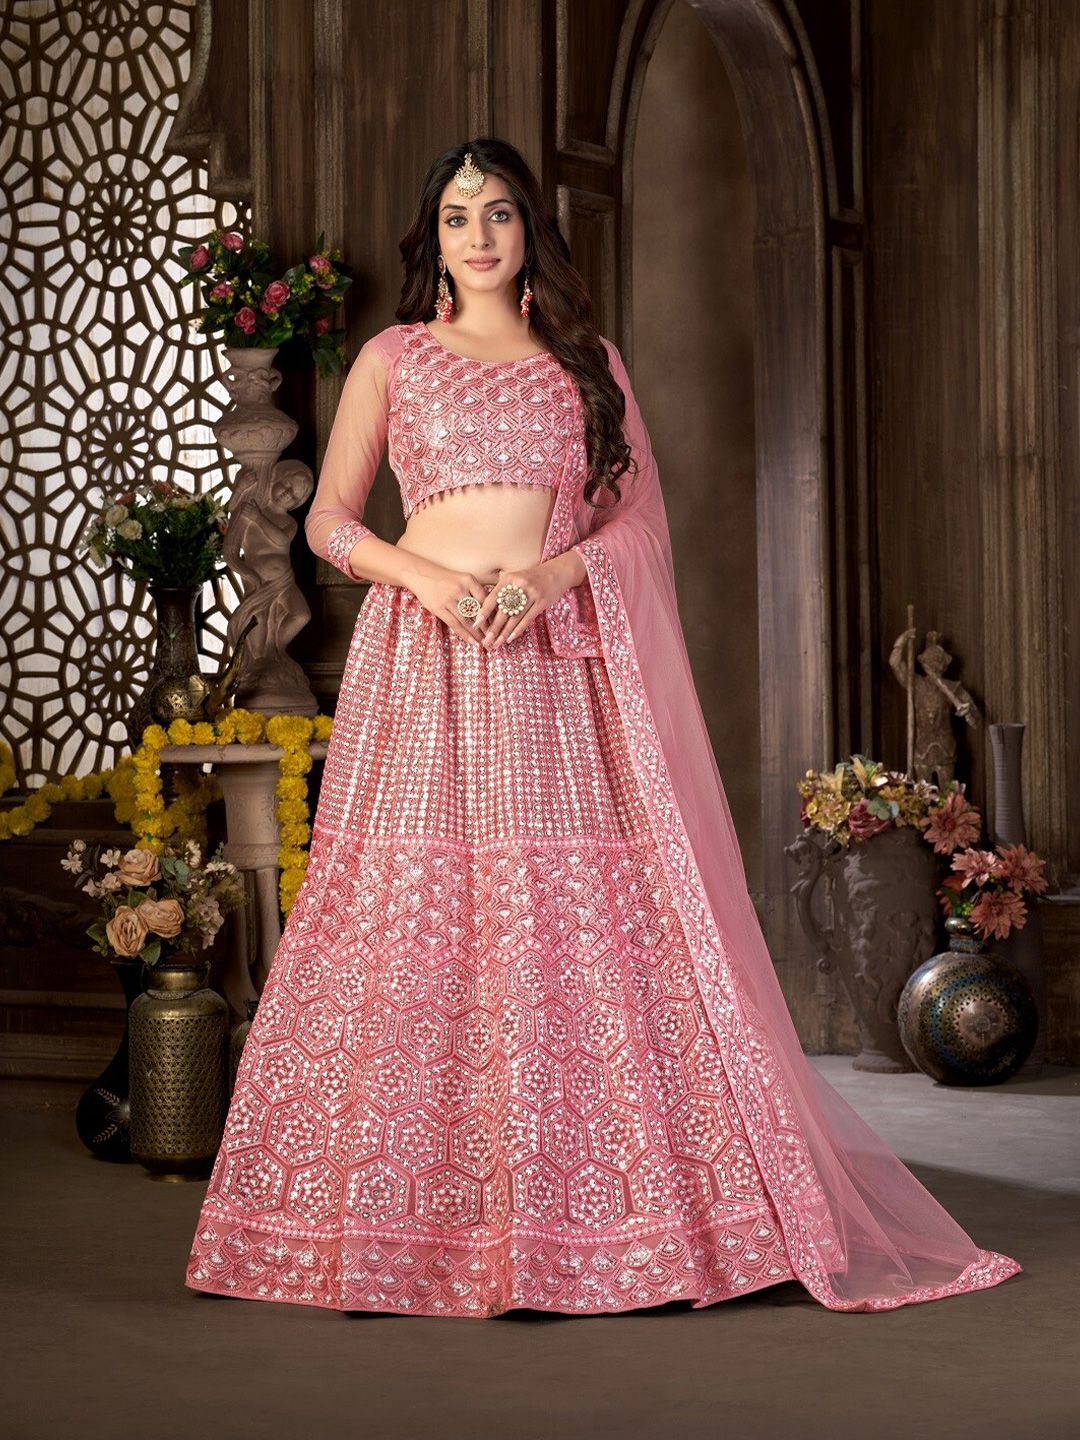 Pandadi Saree Pink & Silver-Toned Embellished Sequinned Semi-Stitched Lehenga & Blouse With Dupatta Price in India